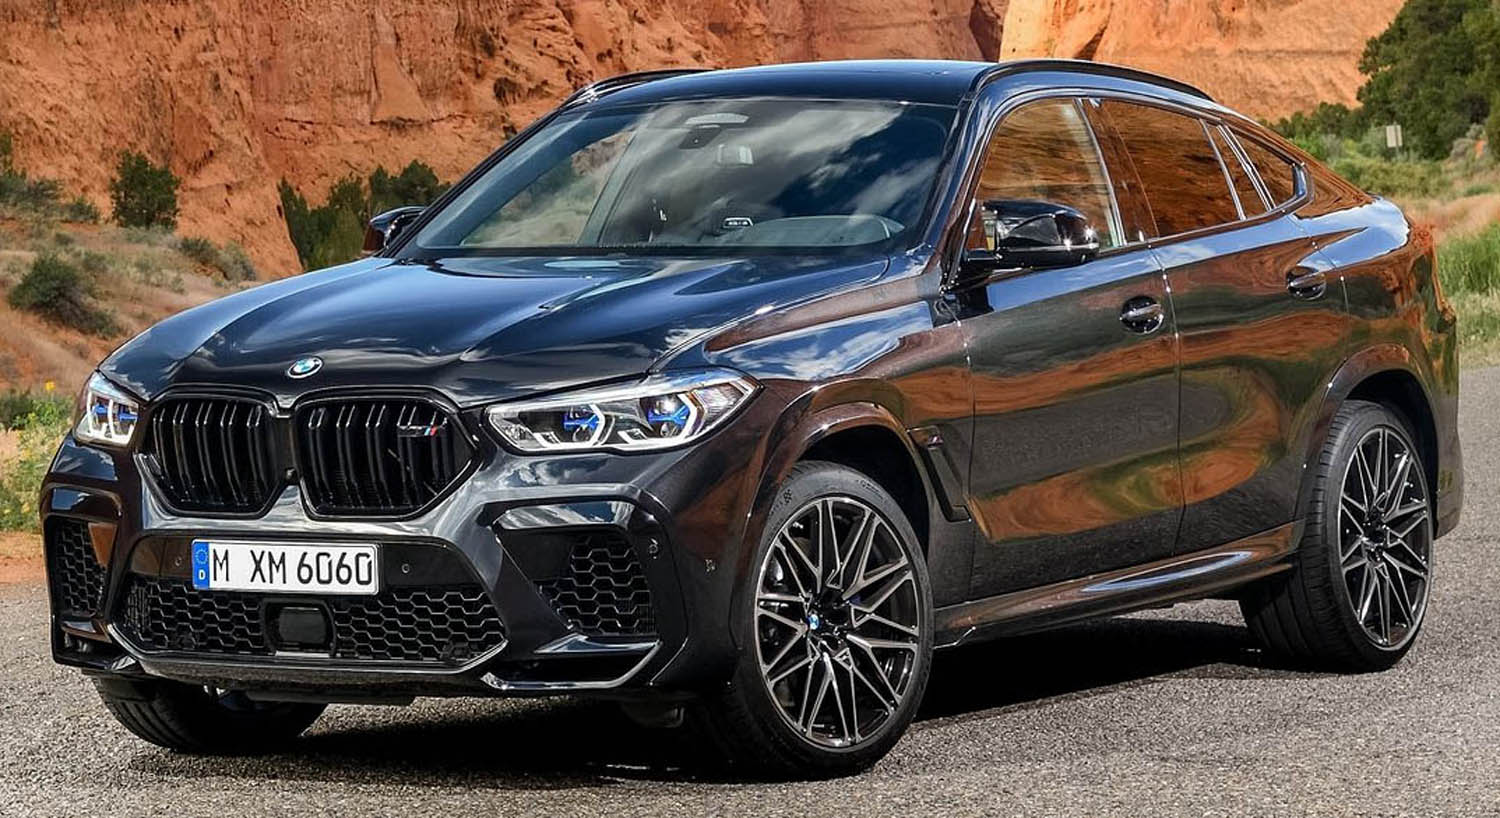 Fabspeed Drops Multiple Parts In E71 BMW X6 M While Keeping The Design  Subtle